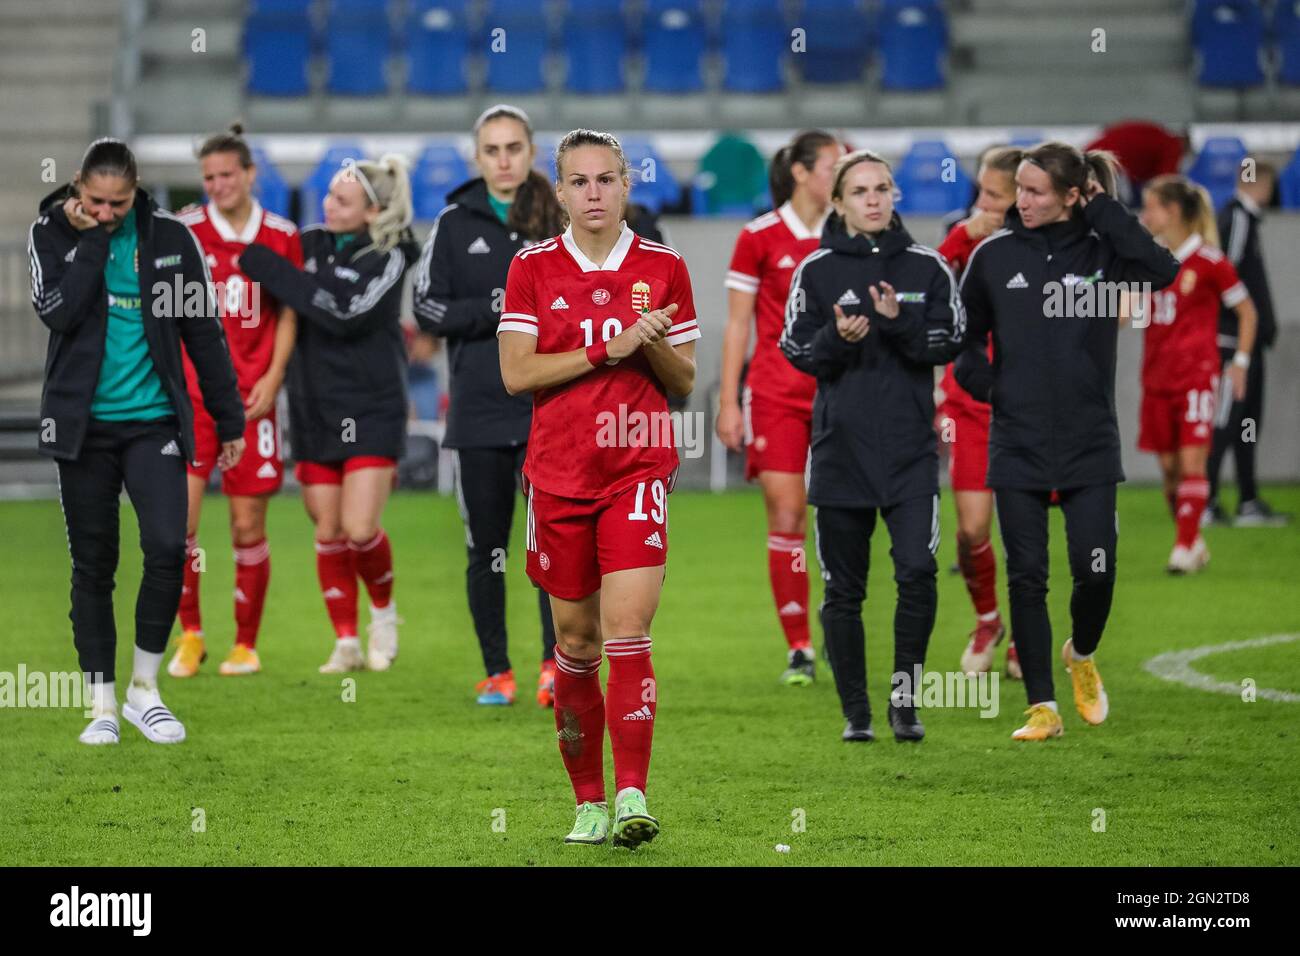 Budapest, Hungary. 21st Sep, 2021. Greetings despite the defeat the Womens World Cup Qualification game between Hungary and Spain at Venue Hidegkuti Nándor Stadion in Budapest, Hungary. Credit: SPP Sport Press Photo. /Alamy Live News Stock Photo